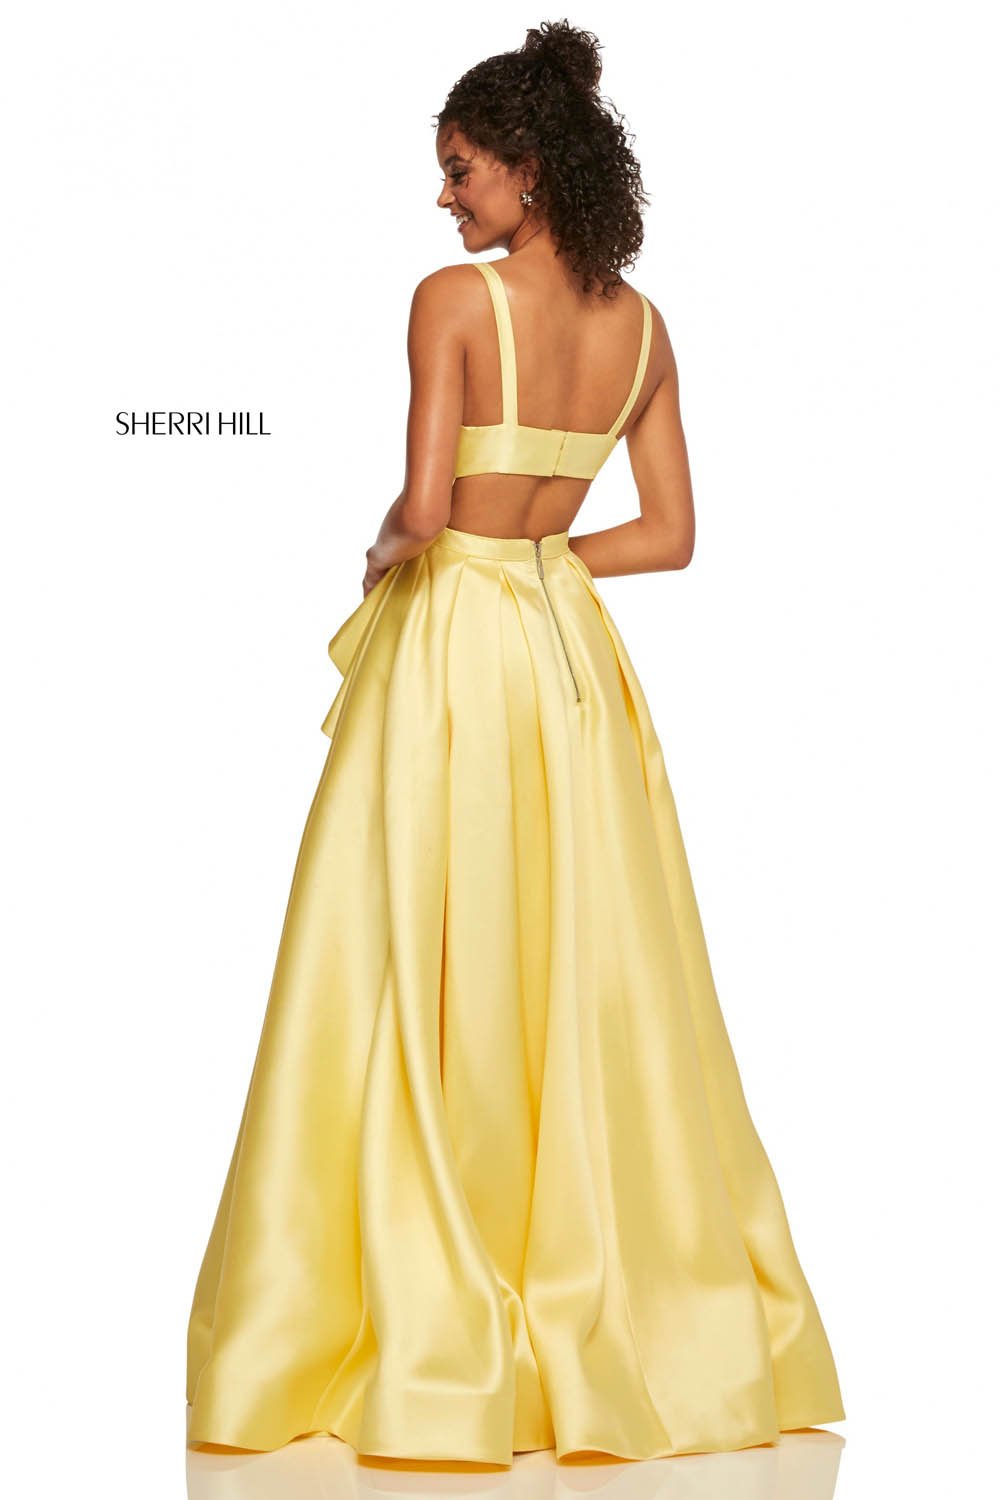 Sherri Hill 52505 dress images in these colors: Pink, Ivory, Lilac, Light Blue, Yellow, Red.